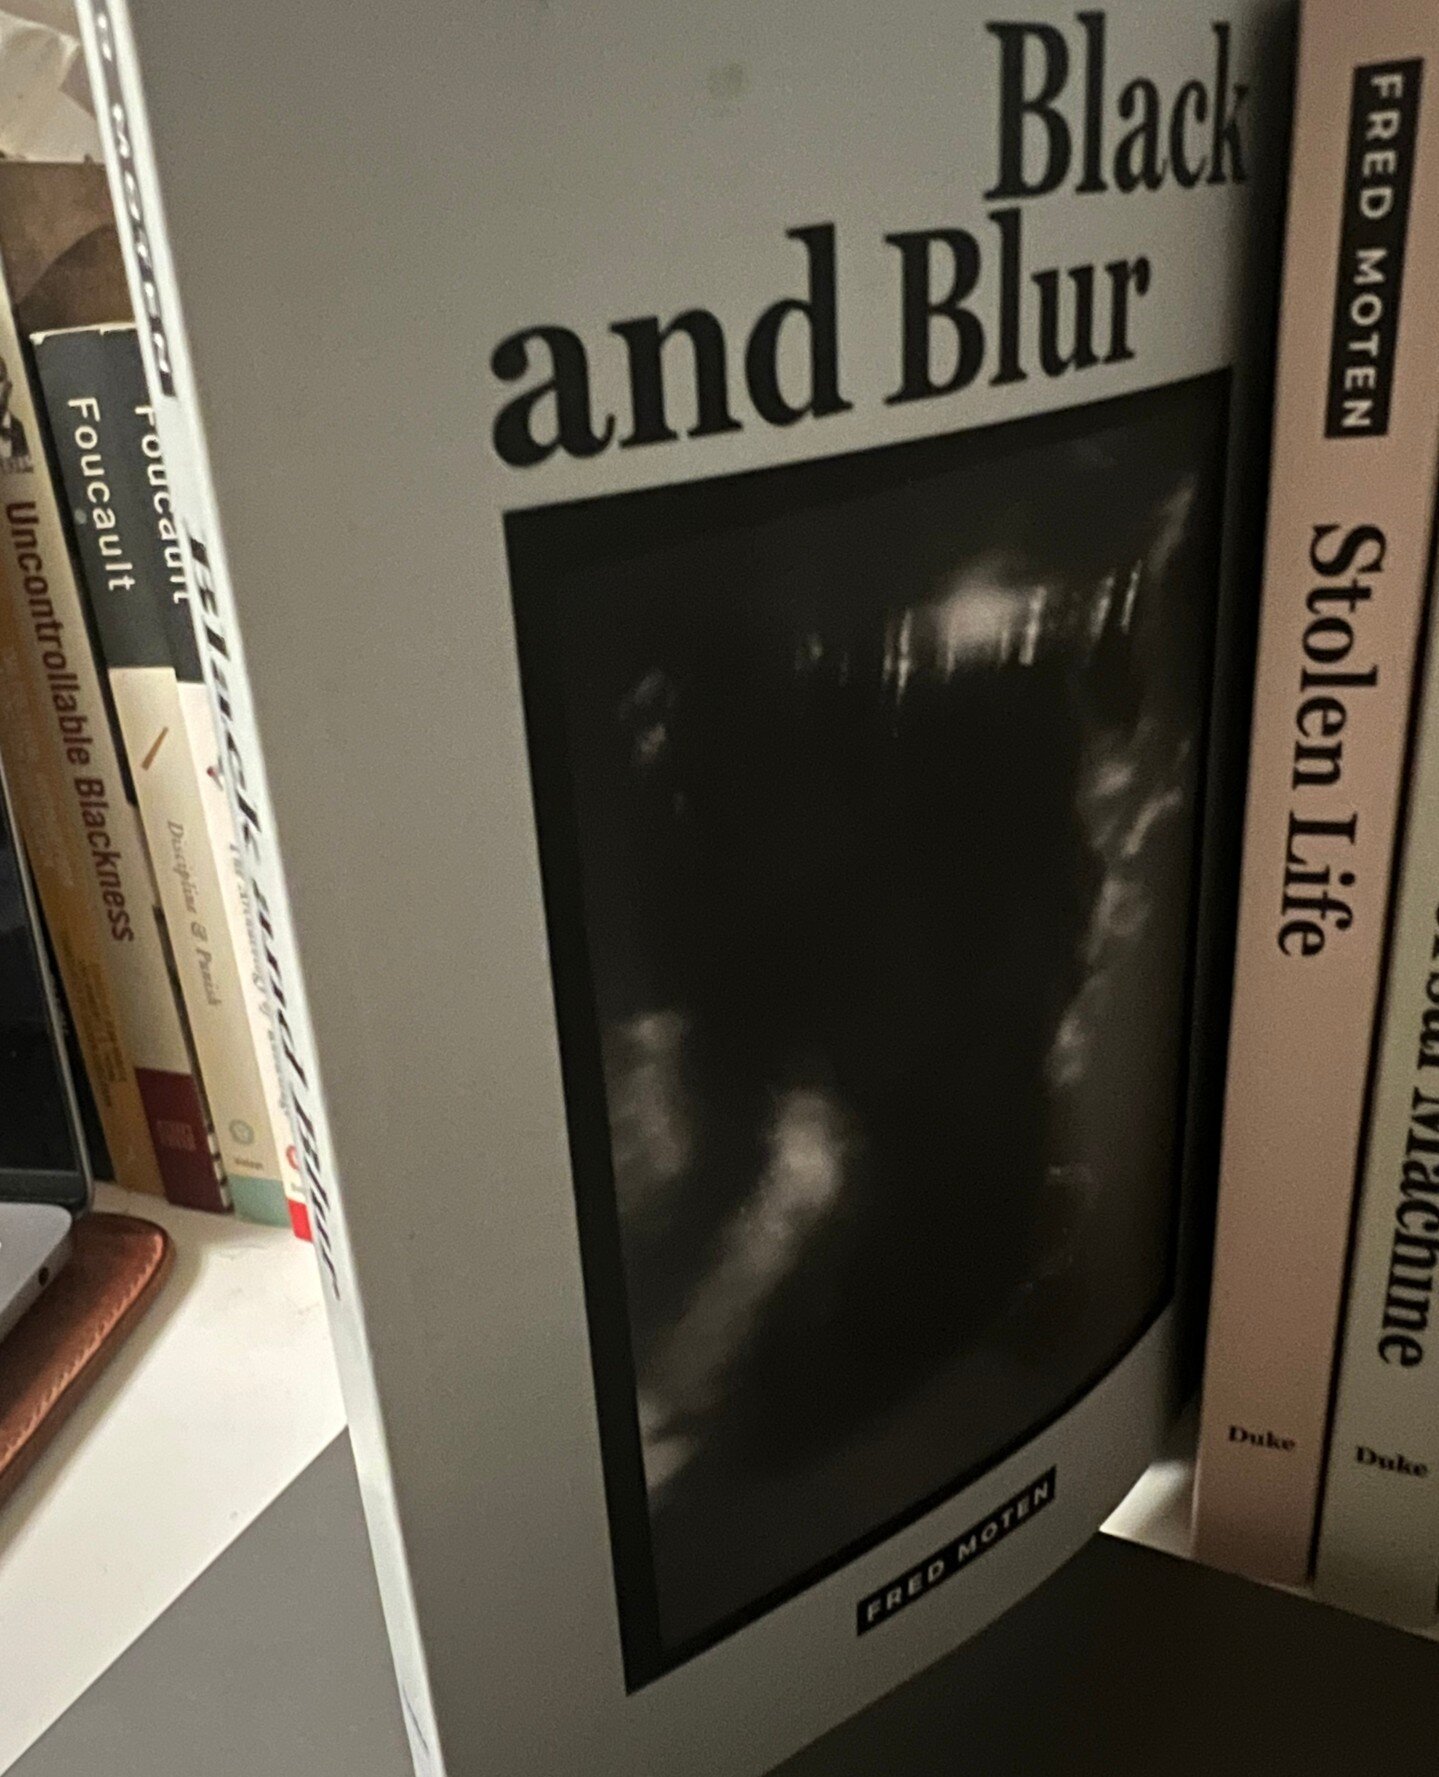 In 'Black and Blur' by Fred Moten, readers confront the weight of history, the beauty of blackness, and haunting echoes of the past. It's been tough to keep this title at bay in our Afropessimism group.⁠
⁠
[Read a full description of this book at the